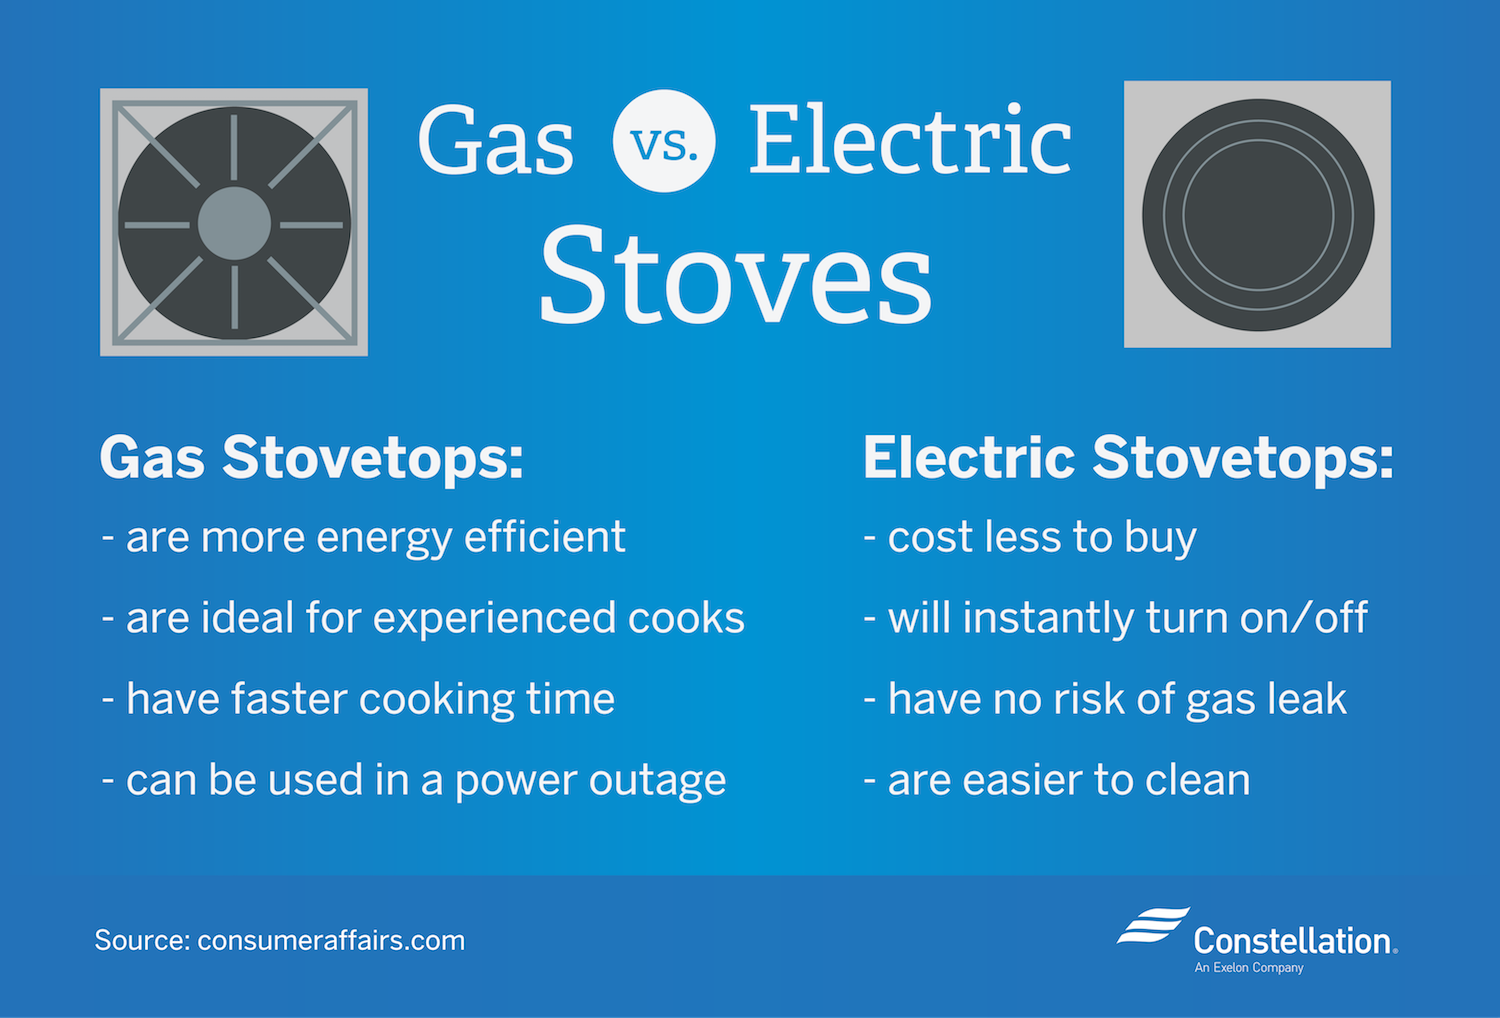 Gas vs. Electric Stoves